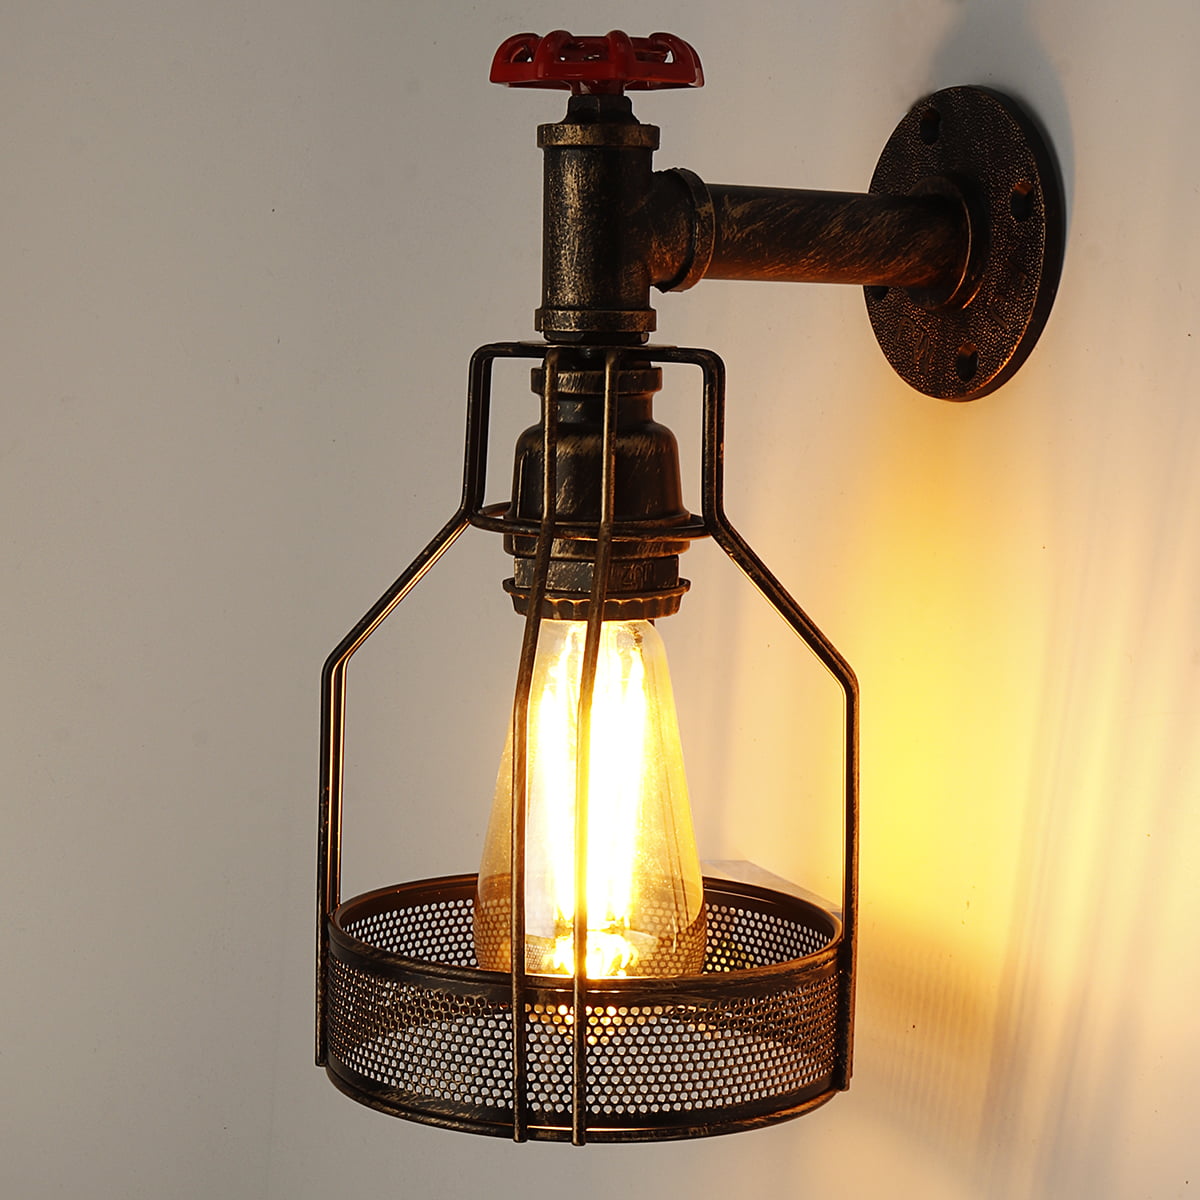 Wall Lamp Light Wire Caged Vintage Sconce Industrial Edison Fixture Steam Punk